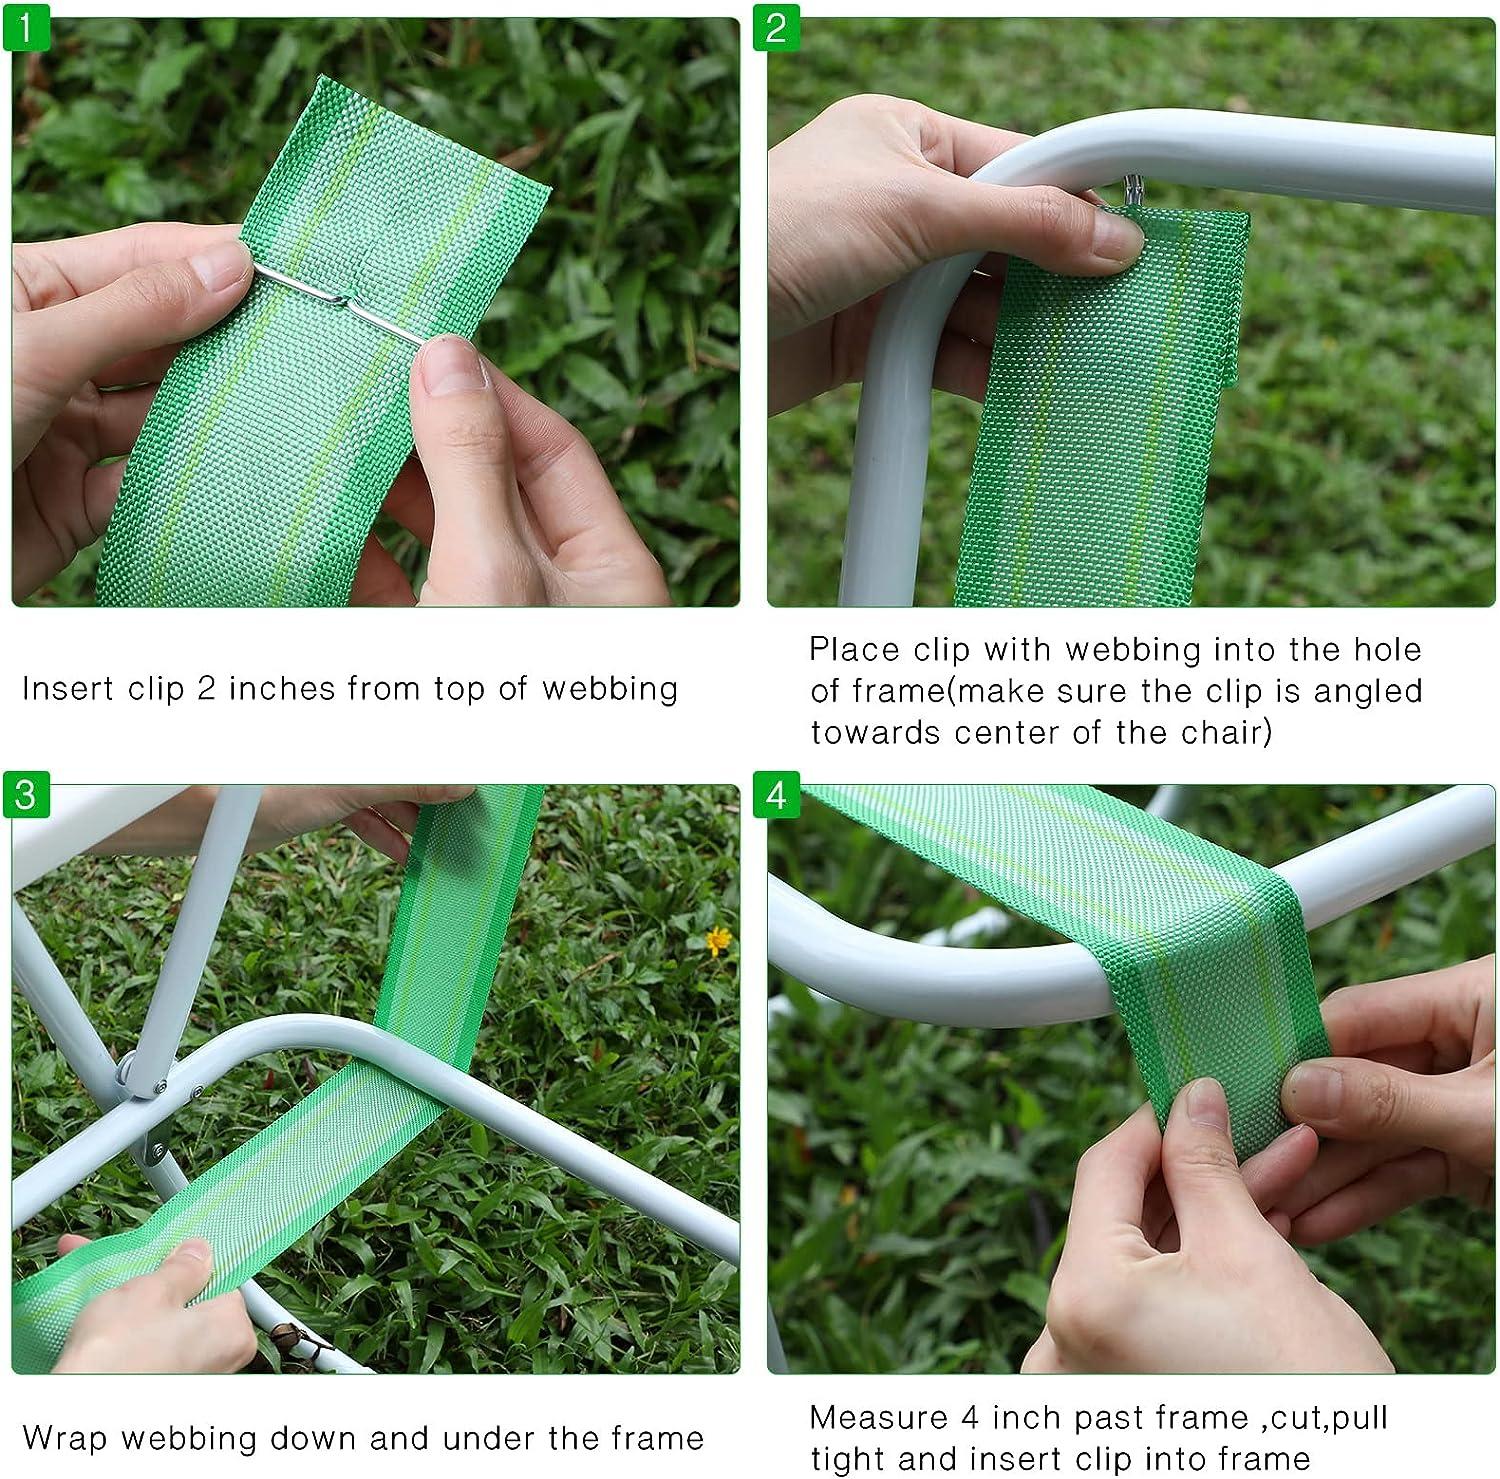 2 Rolls 2 1/4 Inch x 100 Feet Lawn Chair Webbing Replacement Webbing Patio Chairs  Webbing White Green Webbing for Lawn Chairs Folding Polypropylene Webbing  for Outdoor Furniture Seat Repair